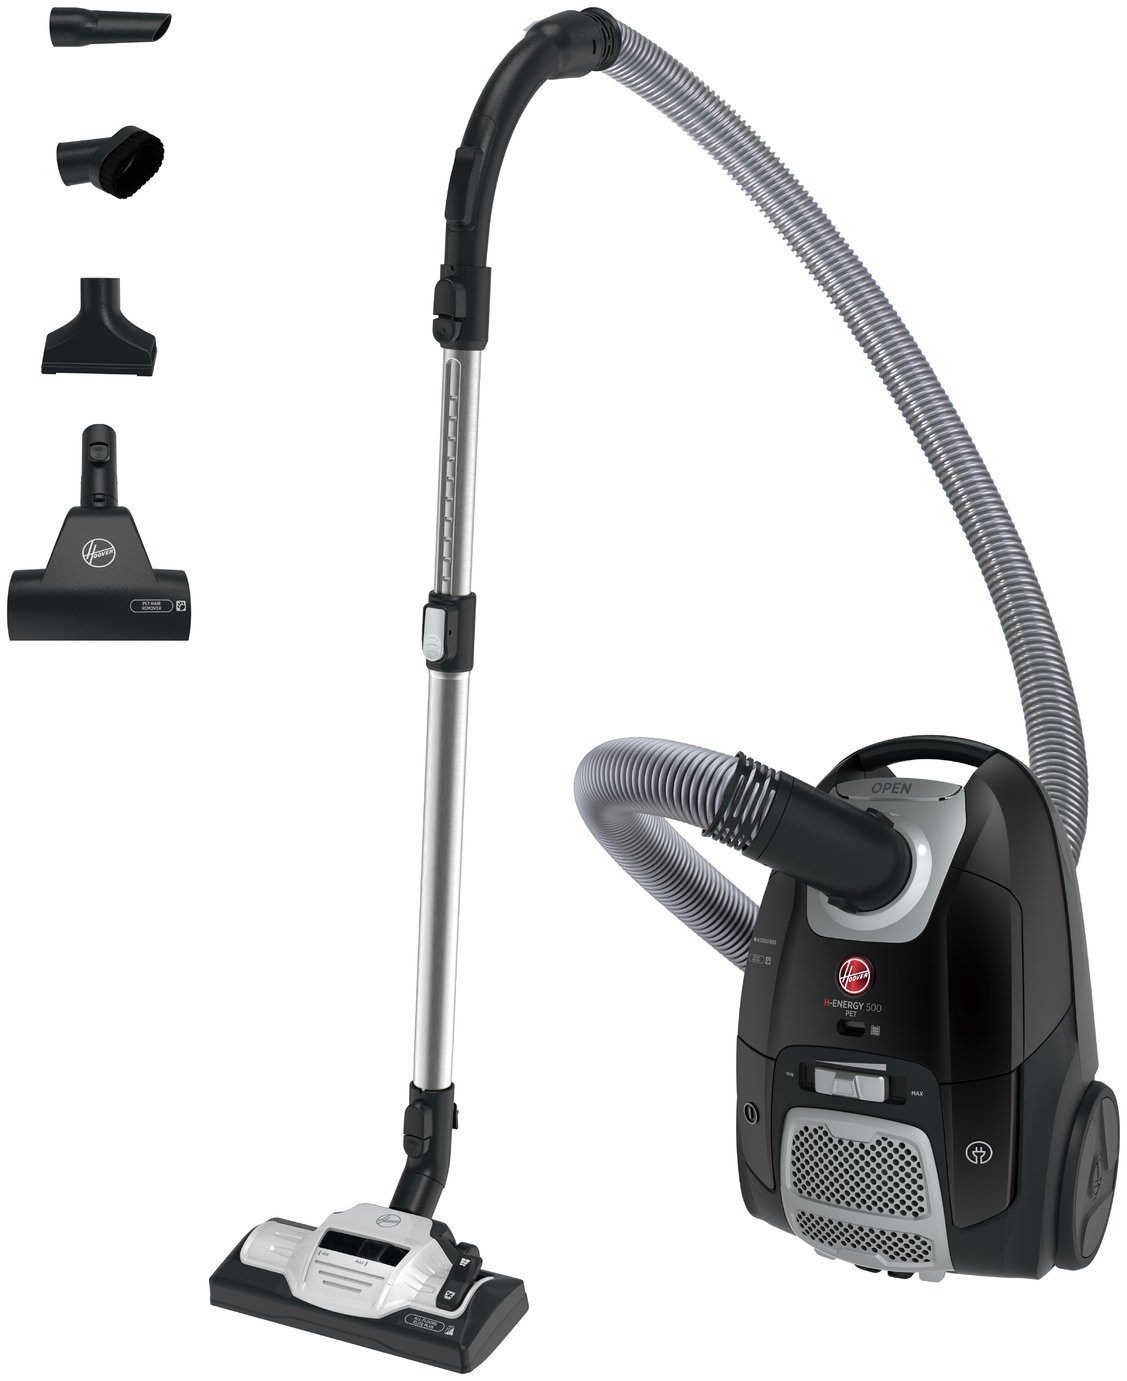 Hoover H-ENERGY 500 Pets Bagged Cylinder Vacuum Cleaner